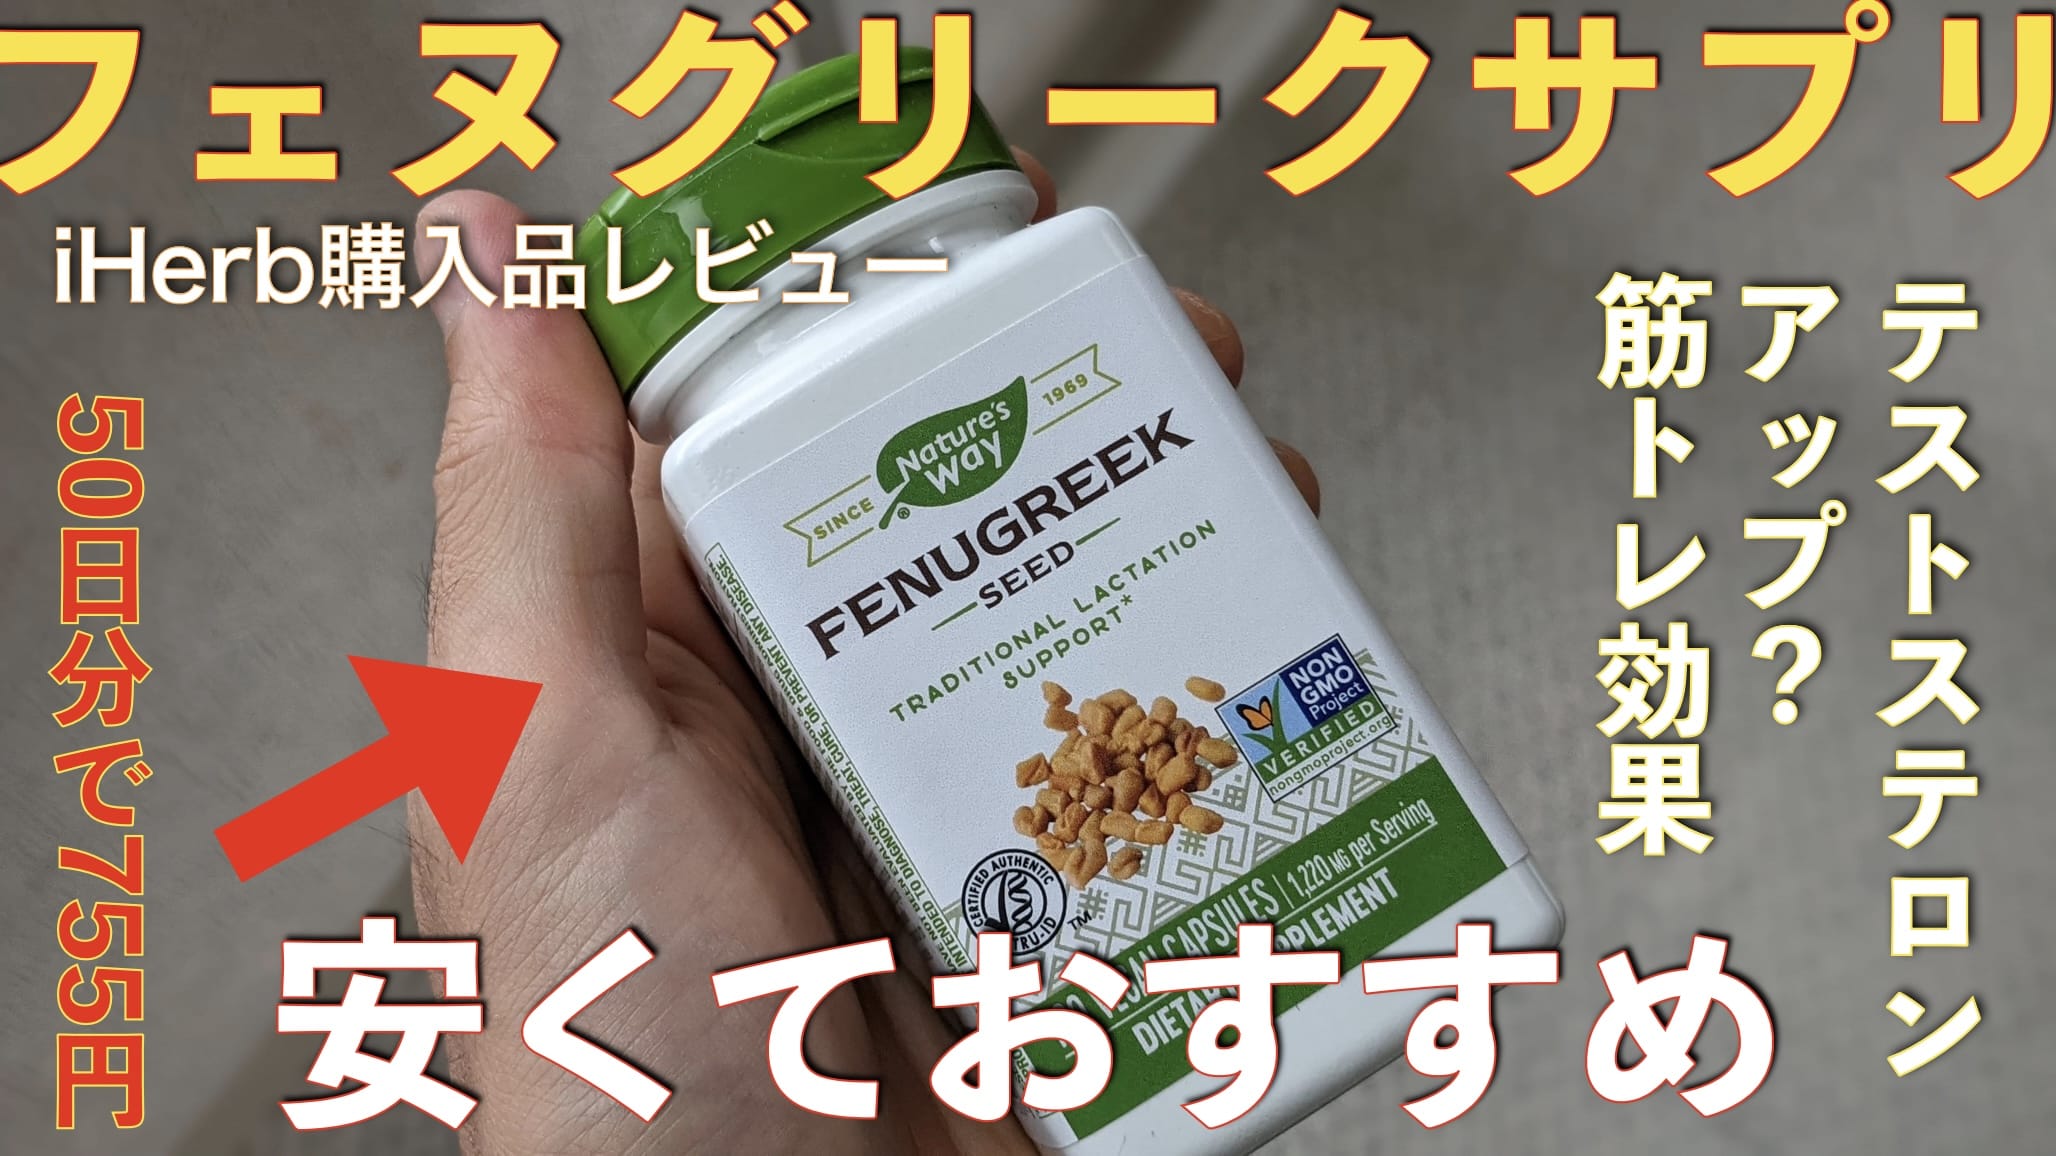 【iHerb購入品開封レビュー】フェヌグリーク Nature's Way【筋トレ】サムネイル画像